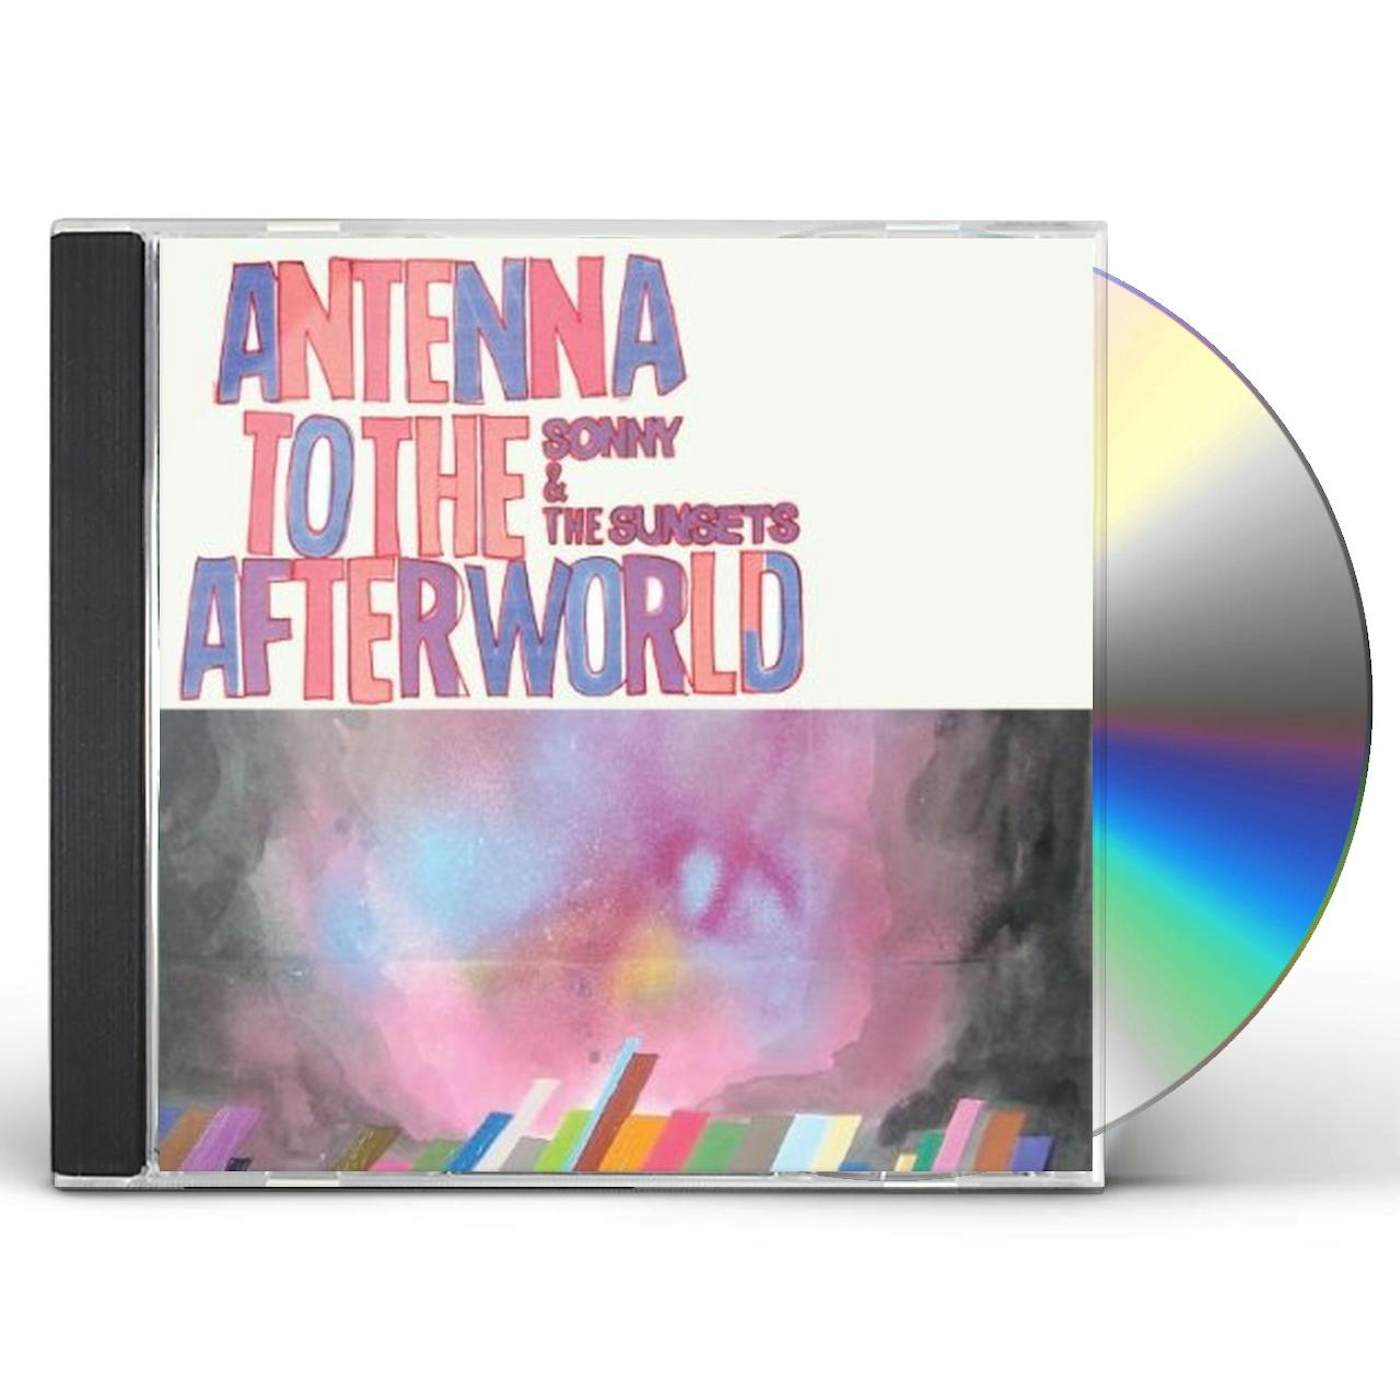 Sonny & The Sunsets ANTENNA TO THE AFTERWORLD CD